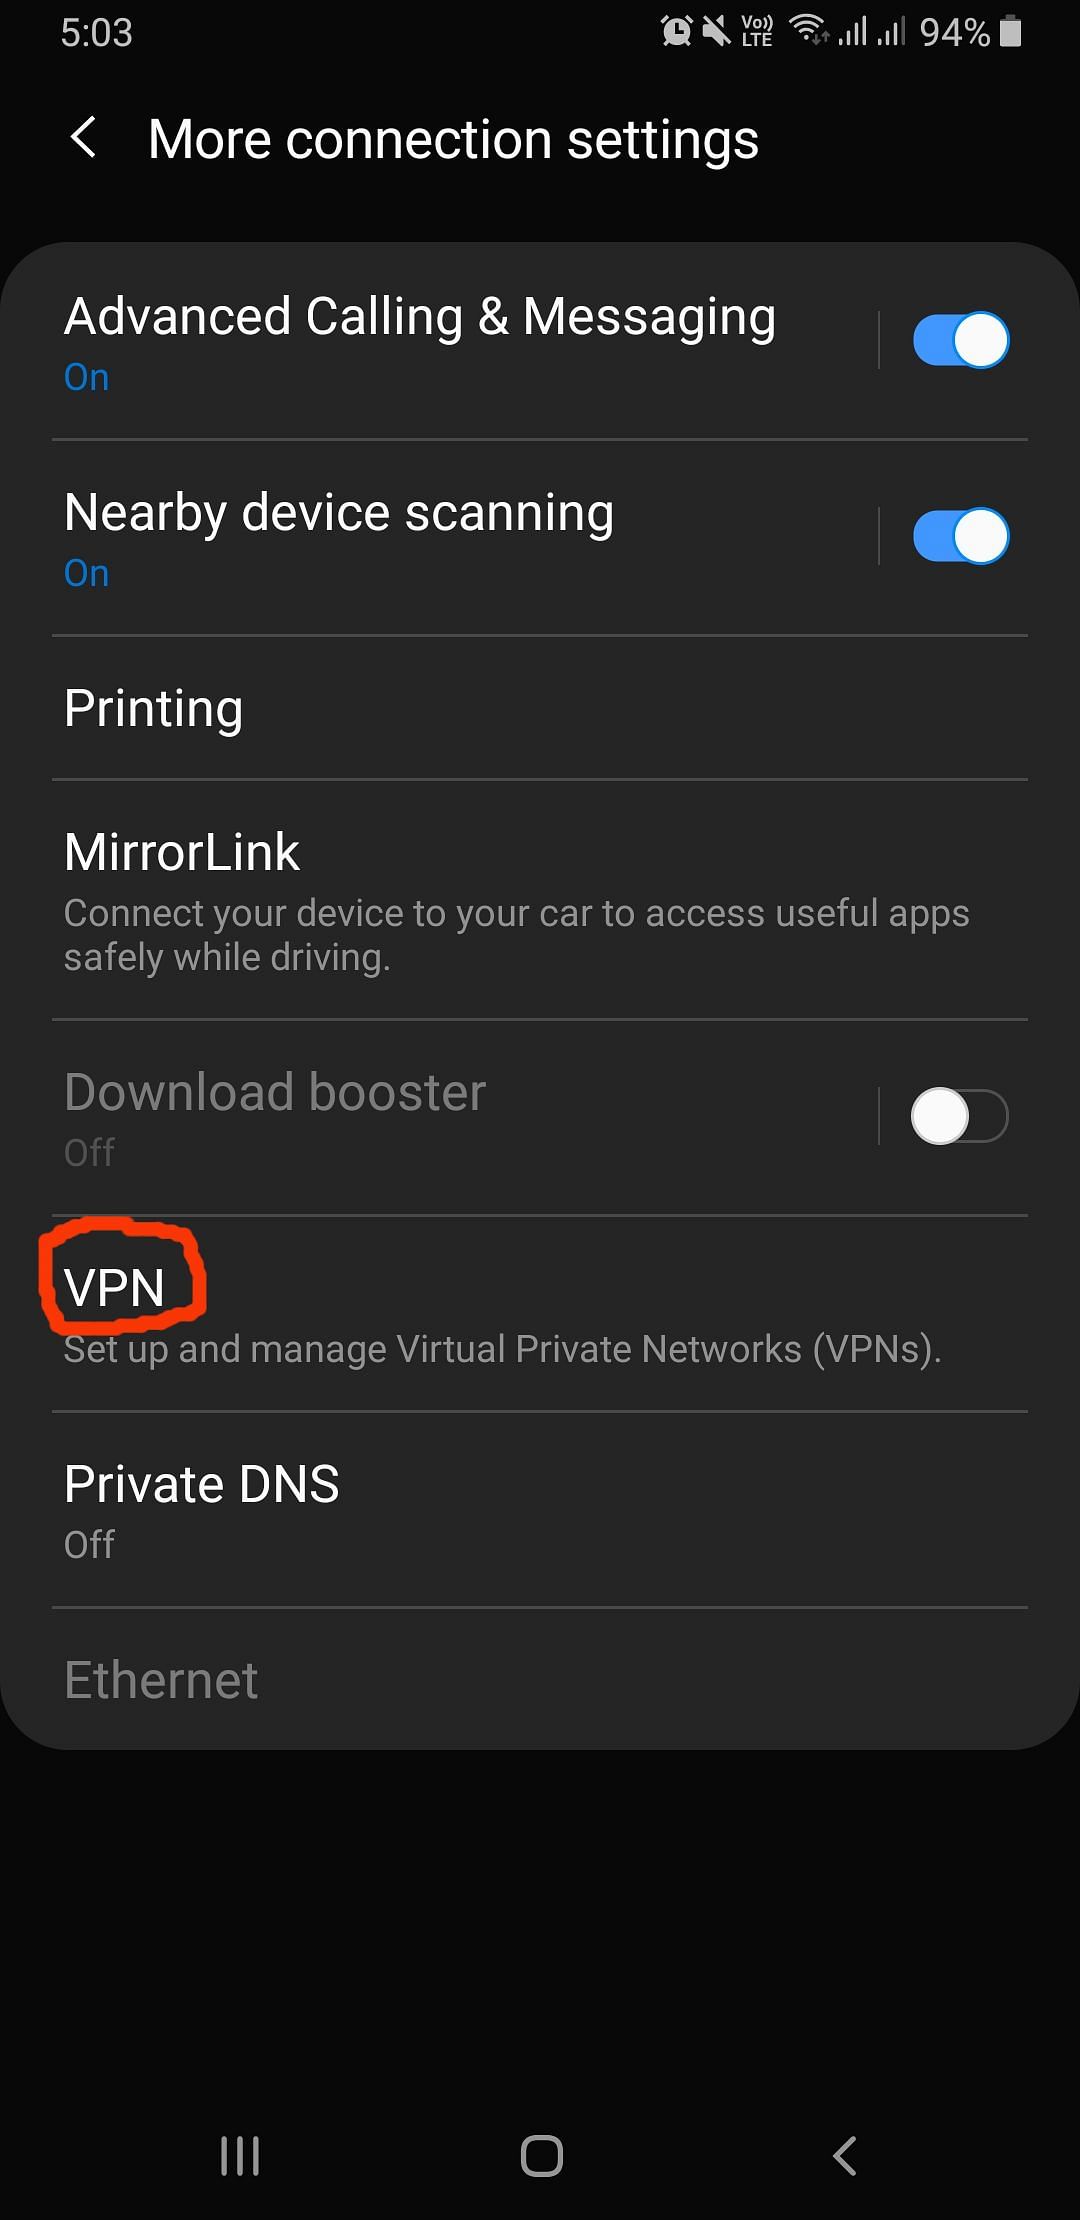 All Android phones have a VPN feature built-in, but it’s not very easy to setup if you are not tech savvy.